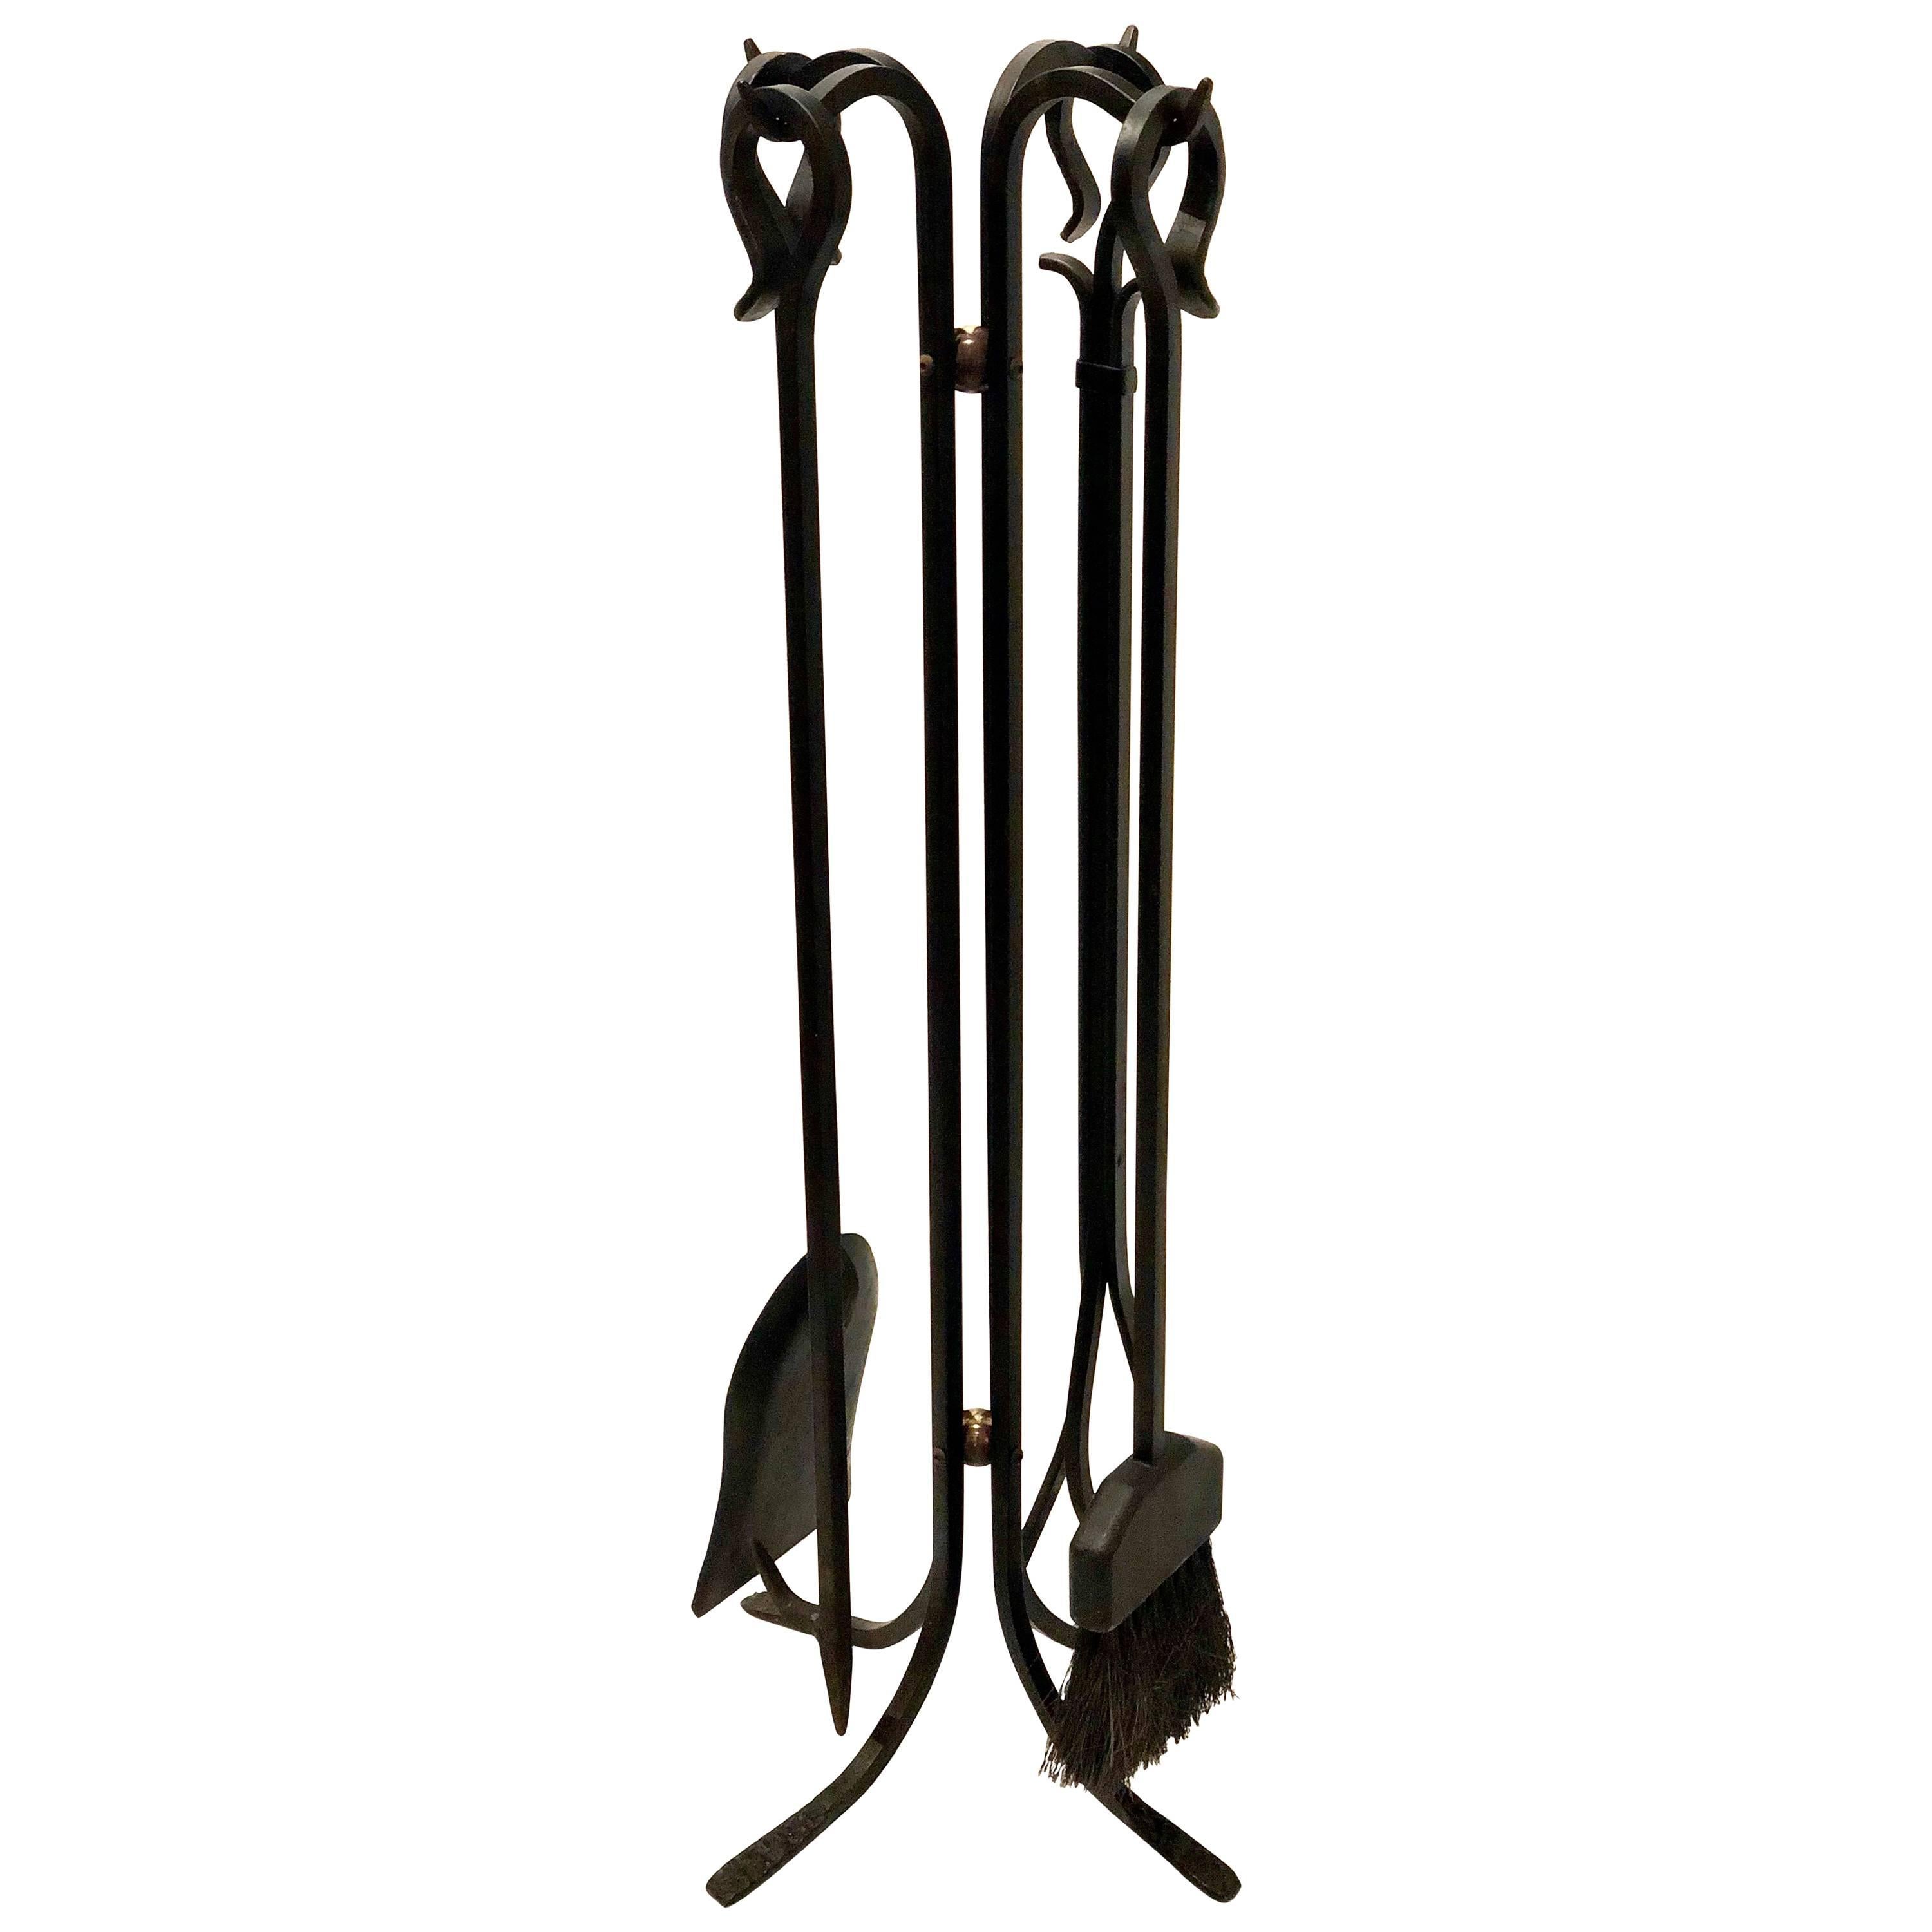 Hand-Forged Iron and Brass Fireplace Tools Set